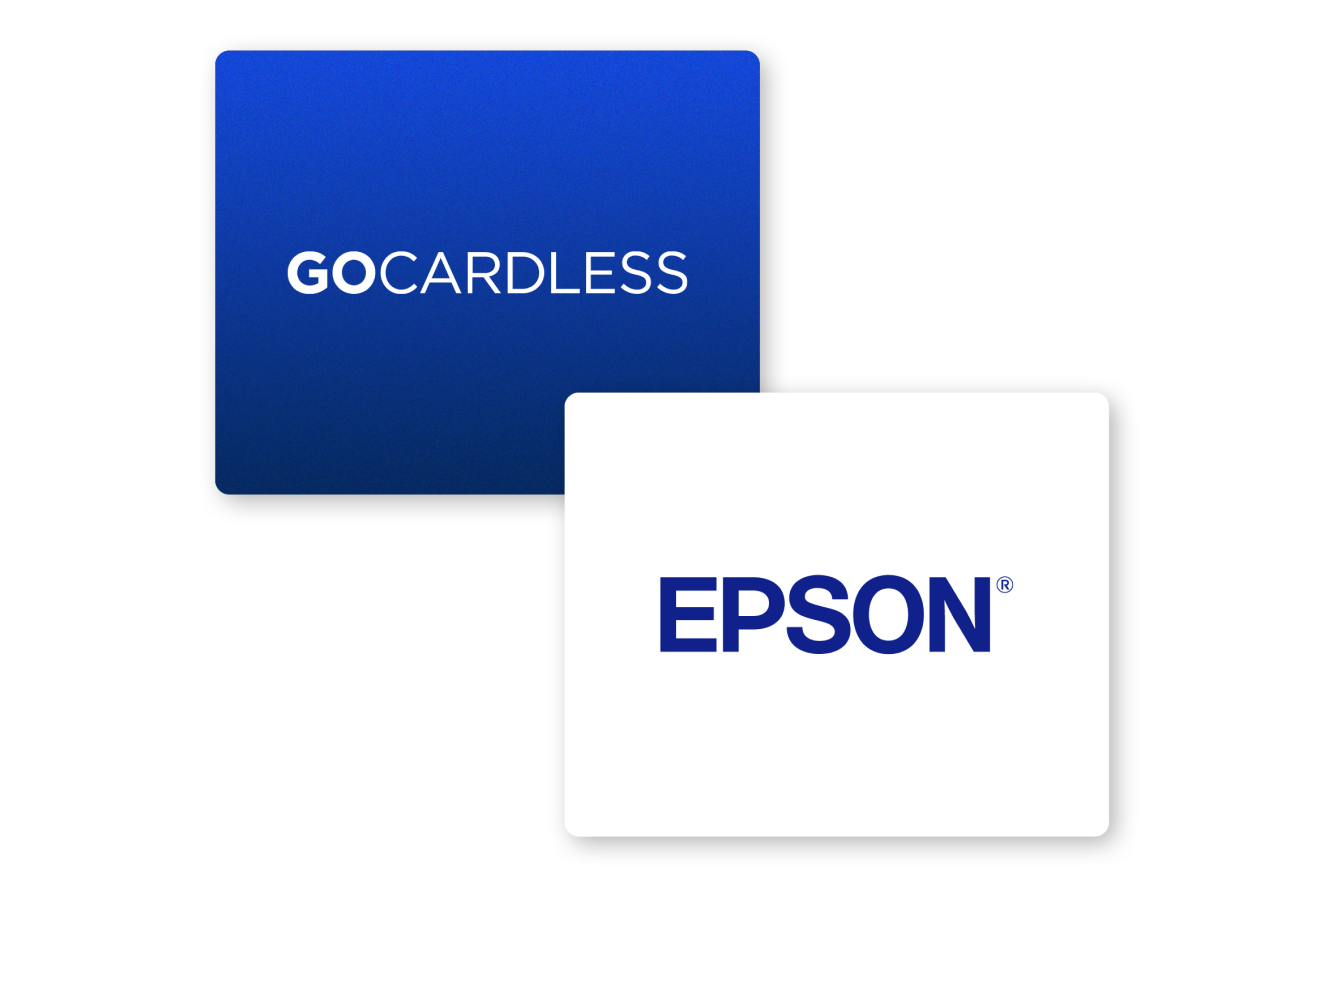 Epson improves conversion by 80%